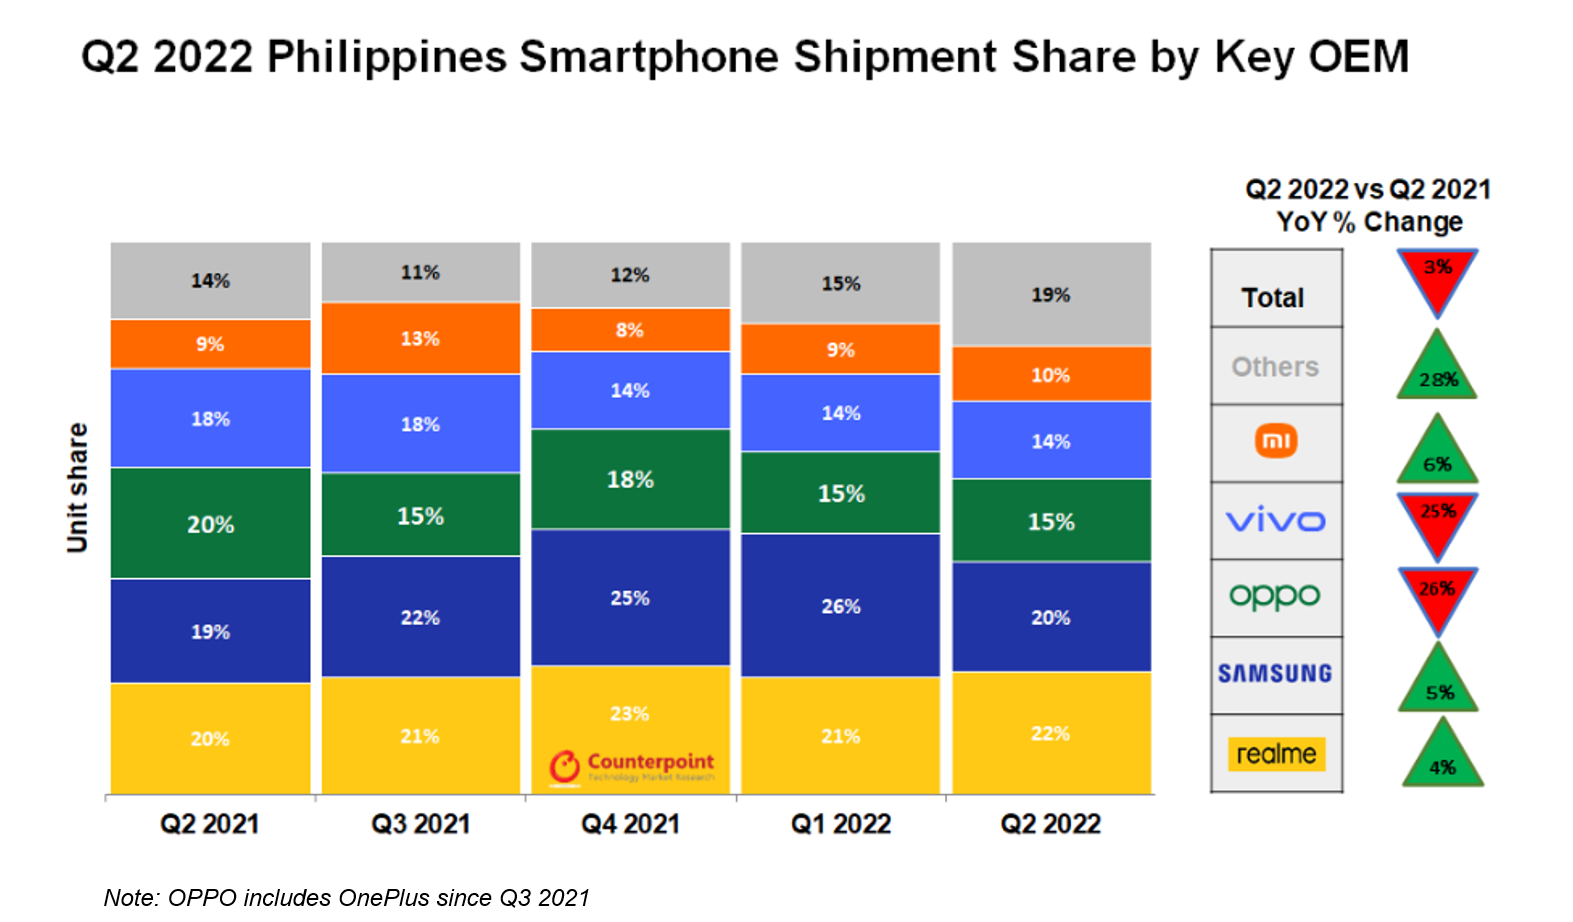 Q2 2022 Philippines Smartphone Shipment Share by Key OEM